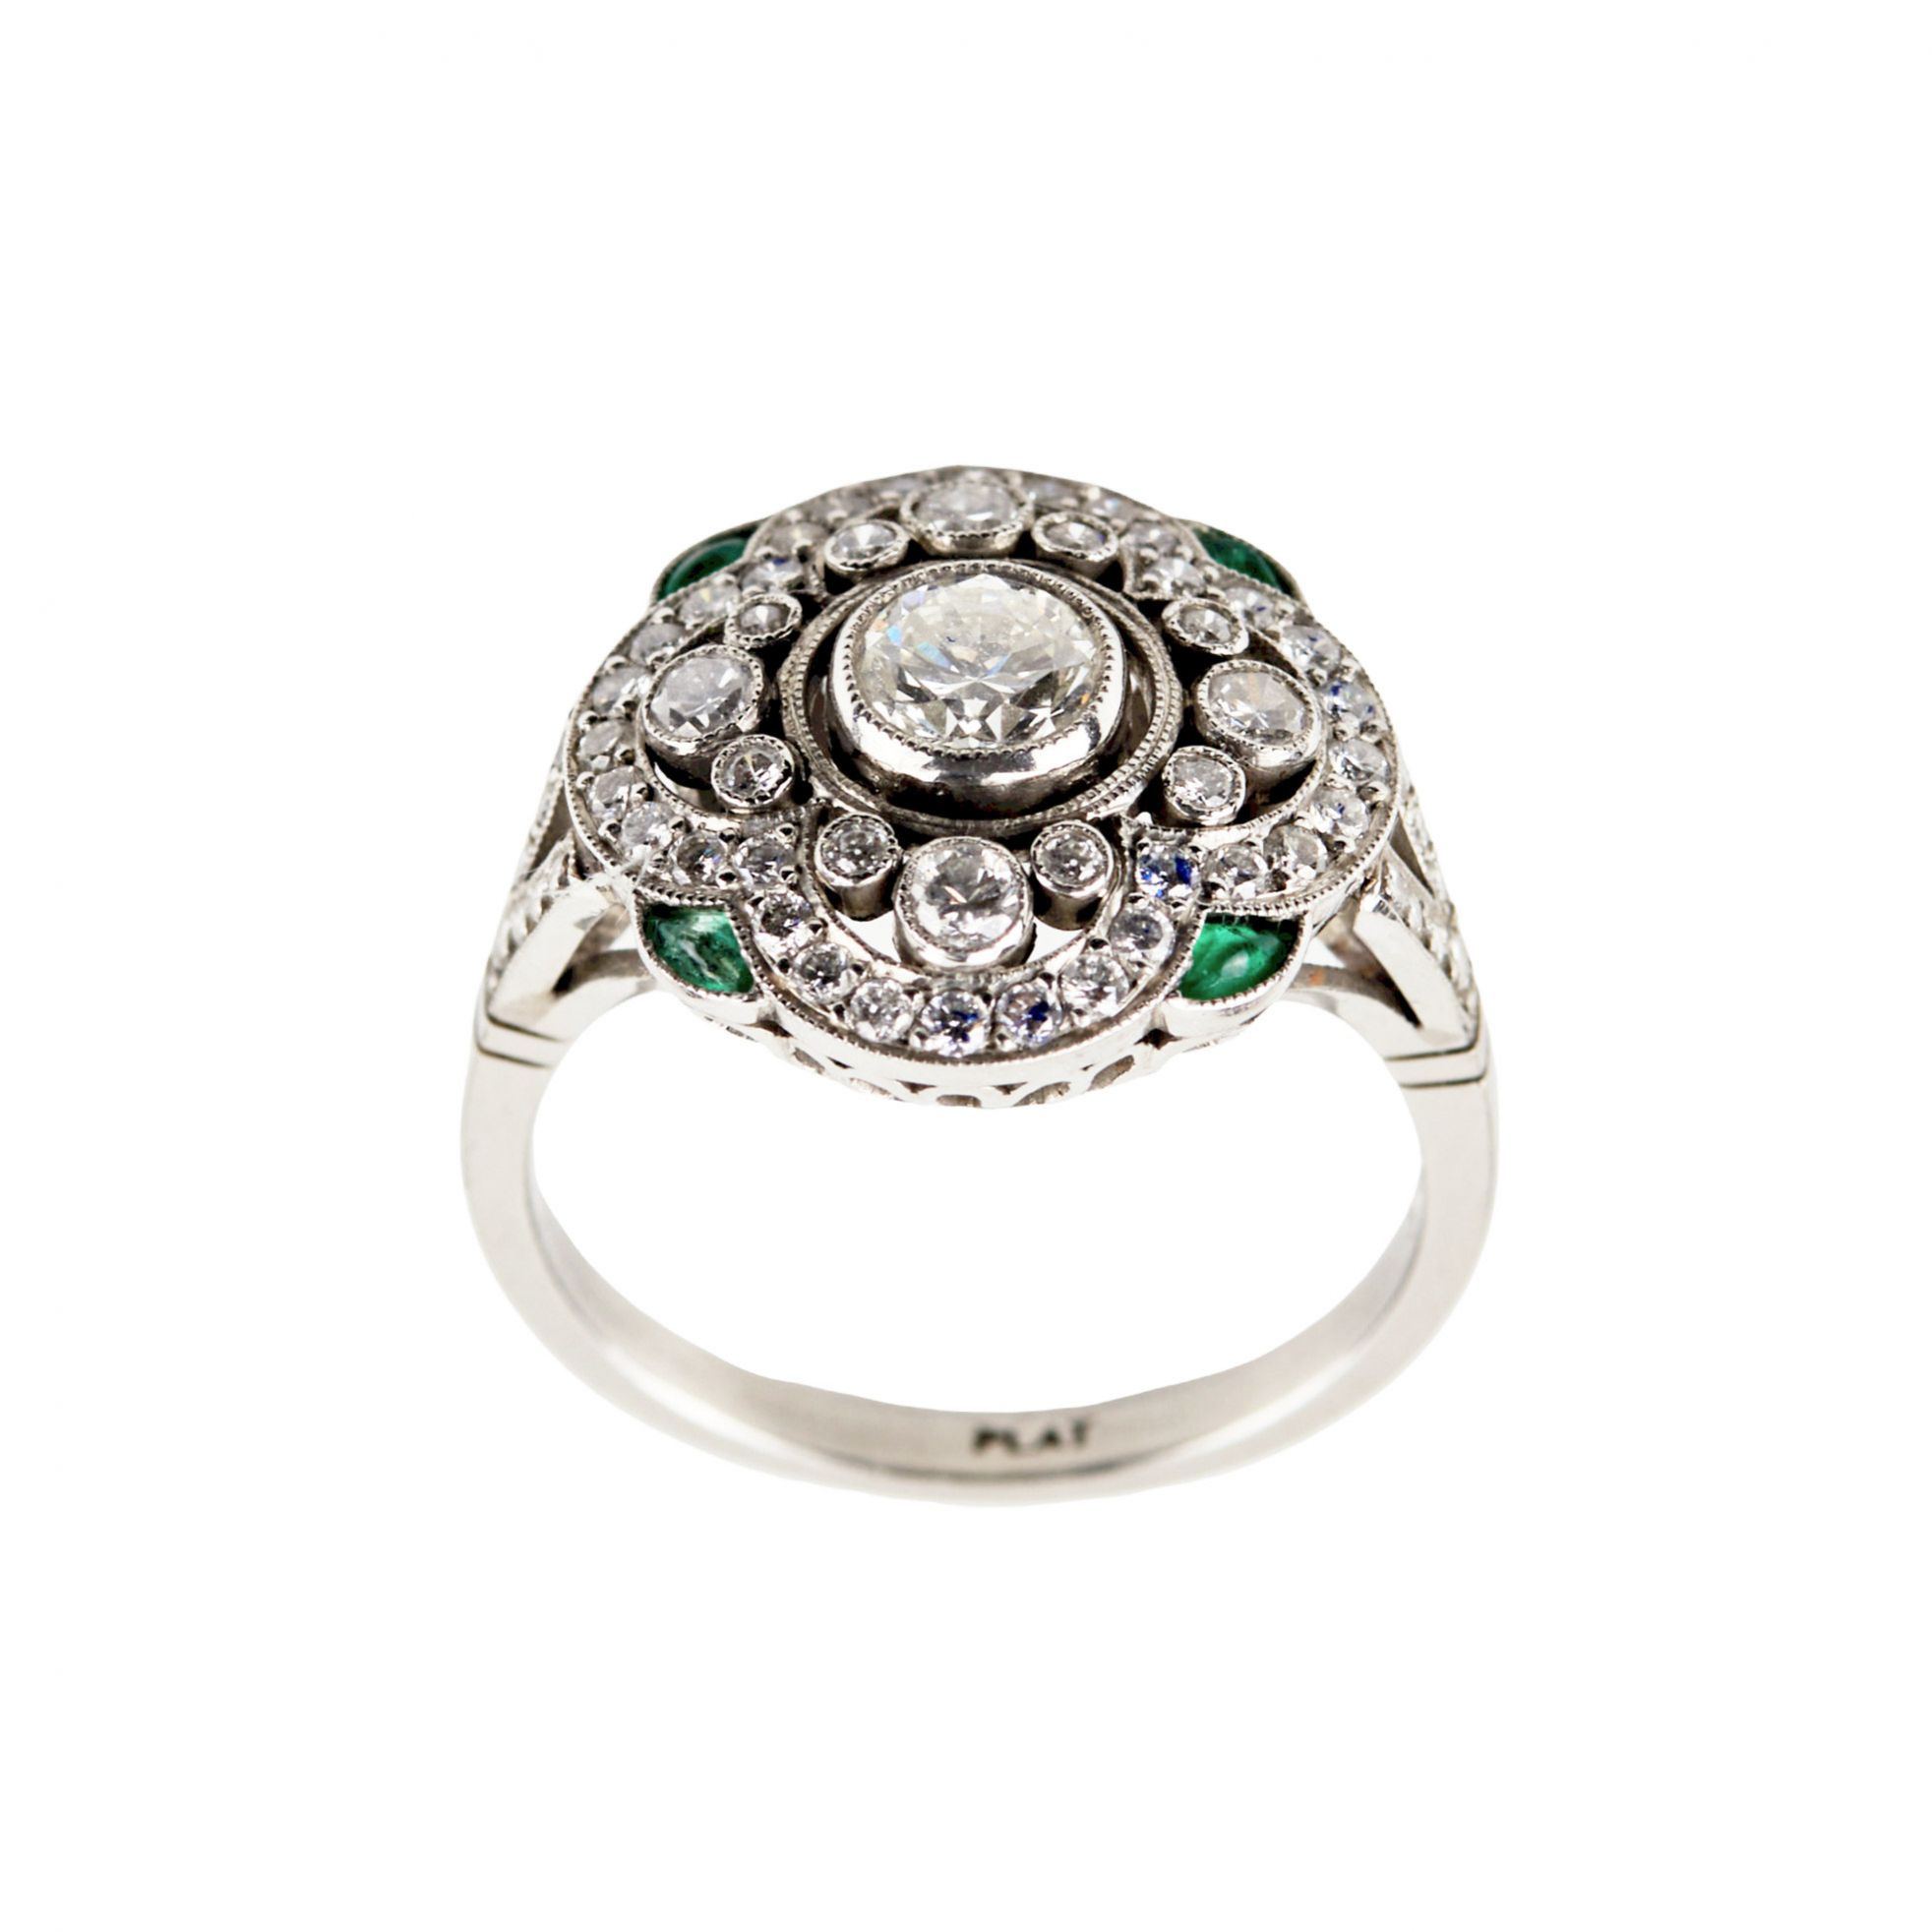 Ring-in-platinum-with-diamonds-and-emeralds-Art-Deco-period-